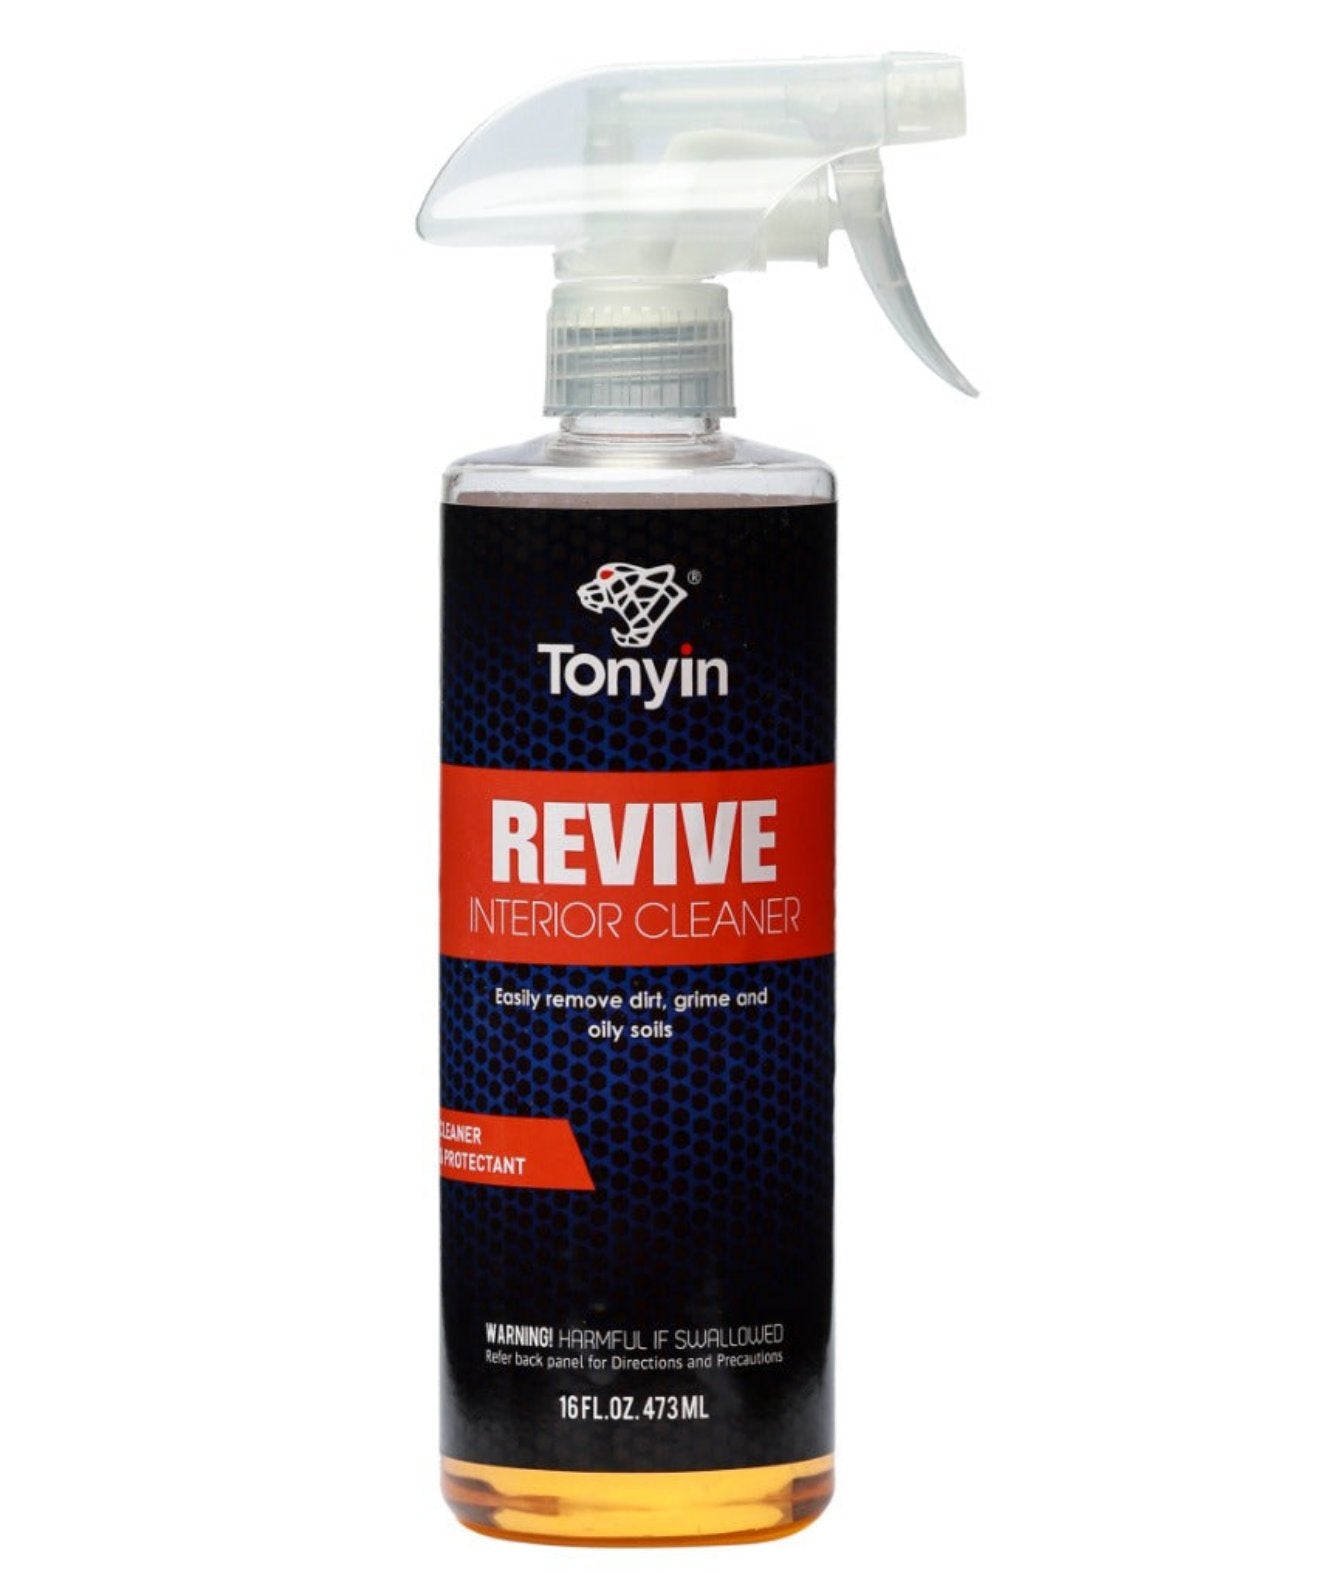 REVIVE (INTERIOR CLEANER)